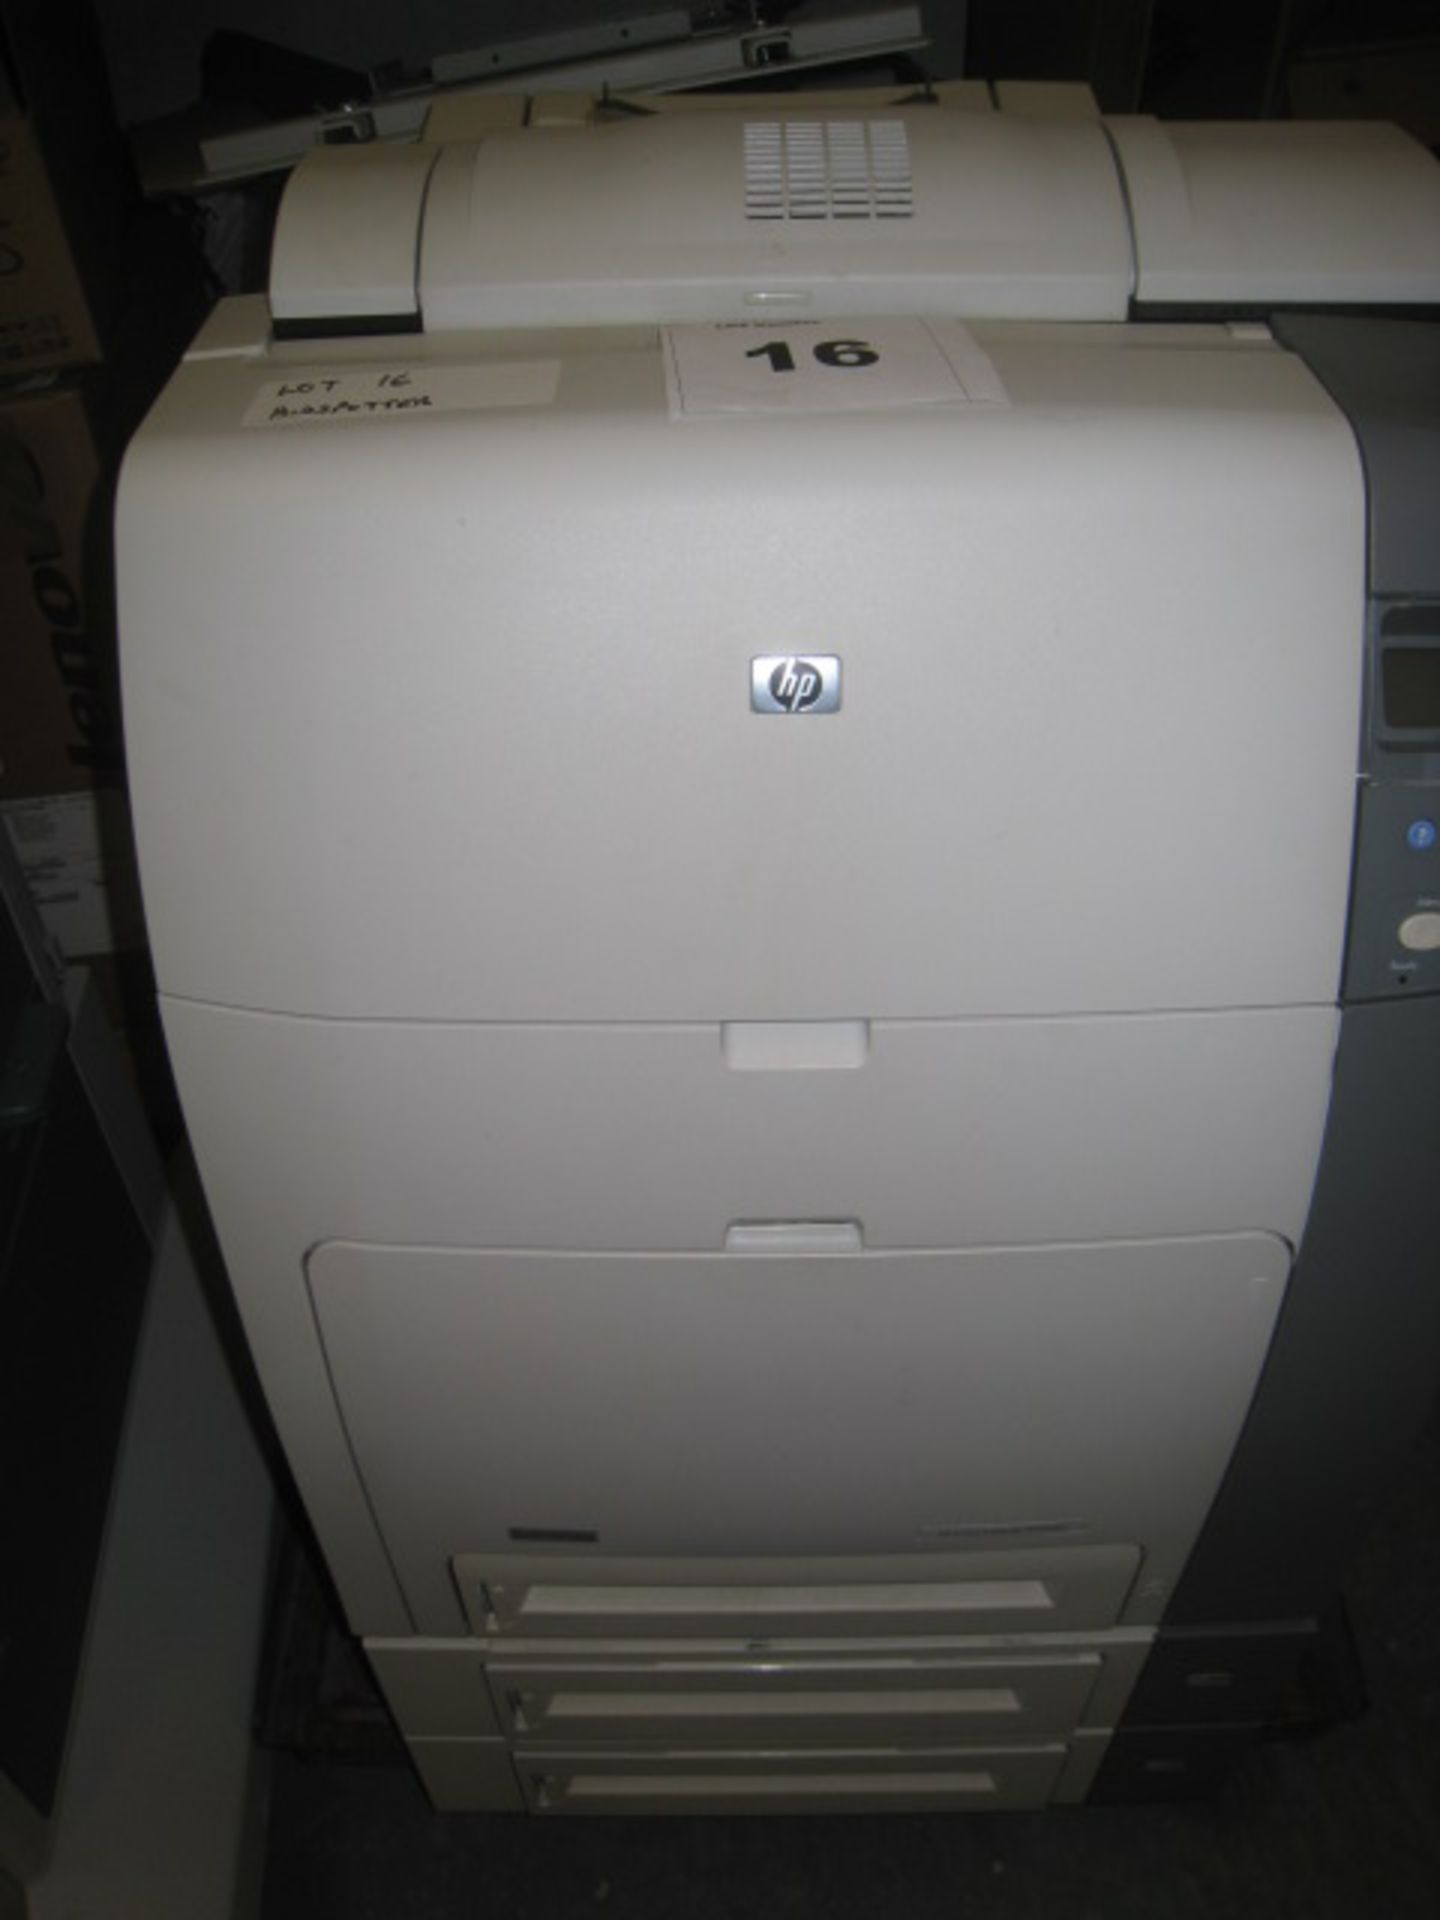 HP COLOUR LASERJET 4700dtn. With test print